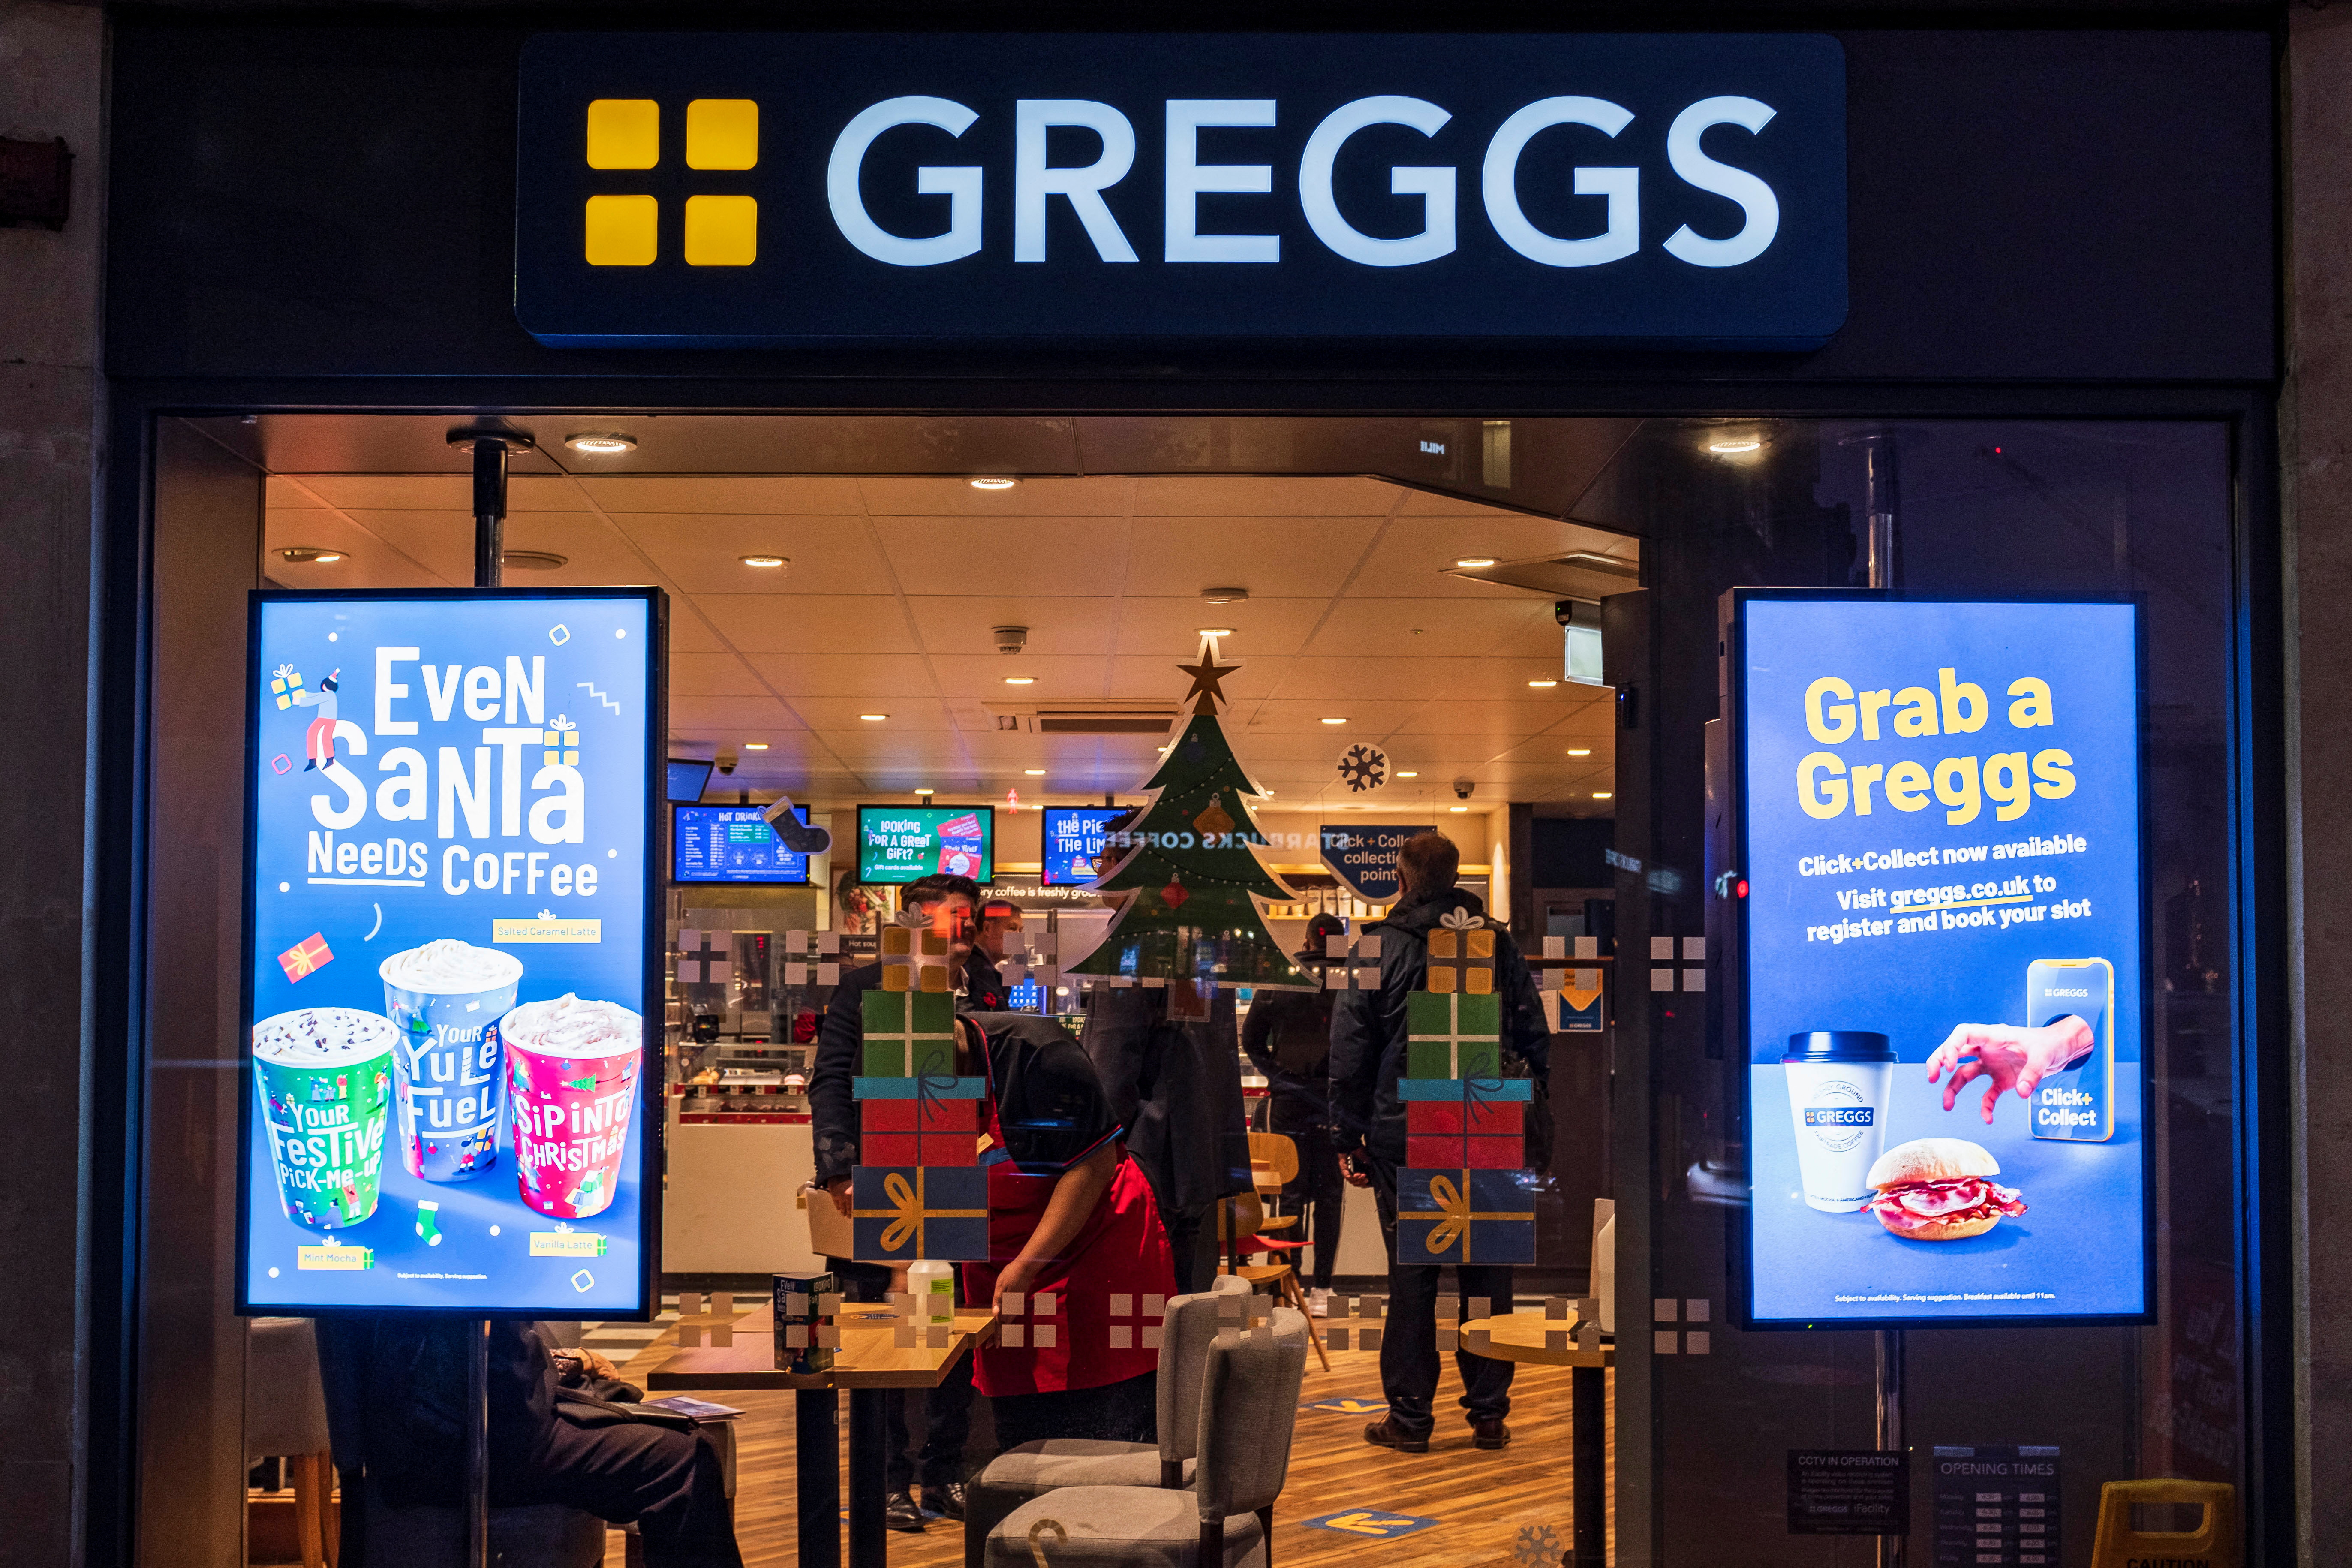 A Christmas themed window display at a branch of Greggs in London